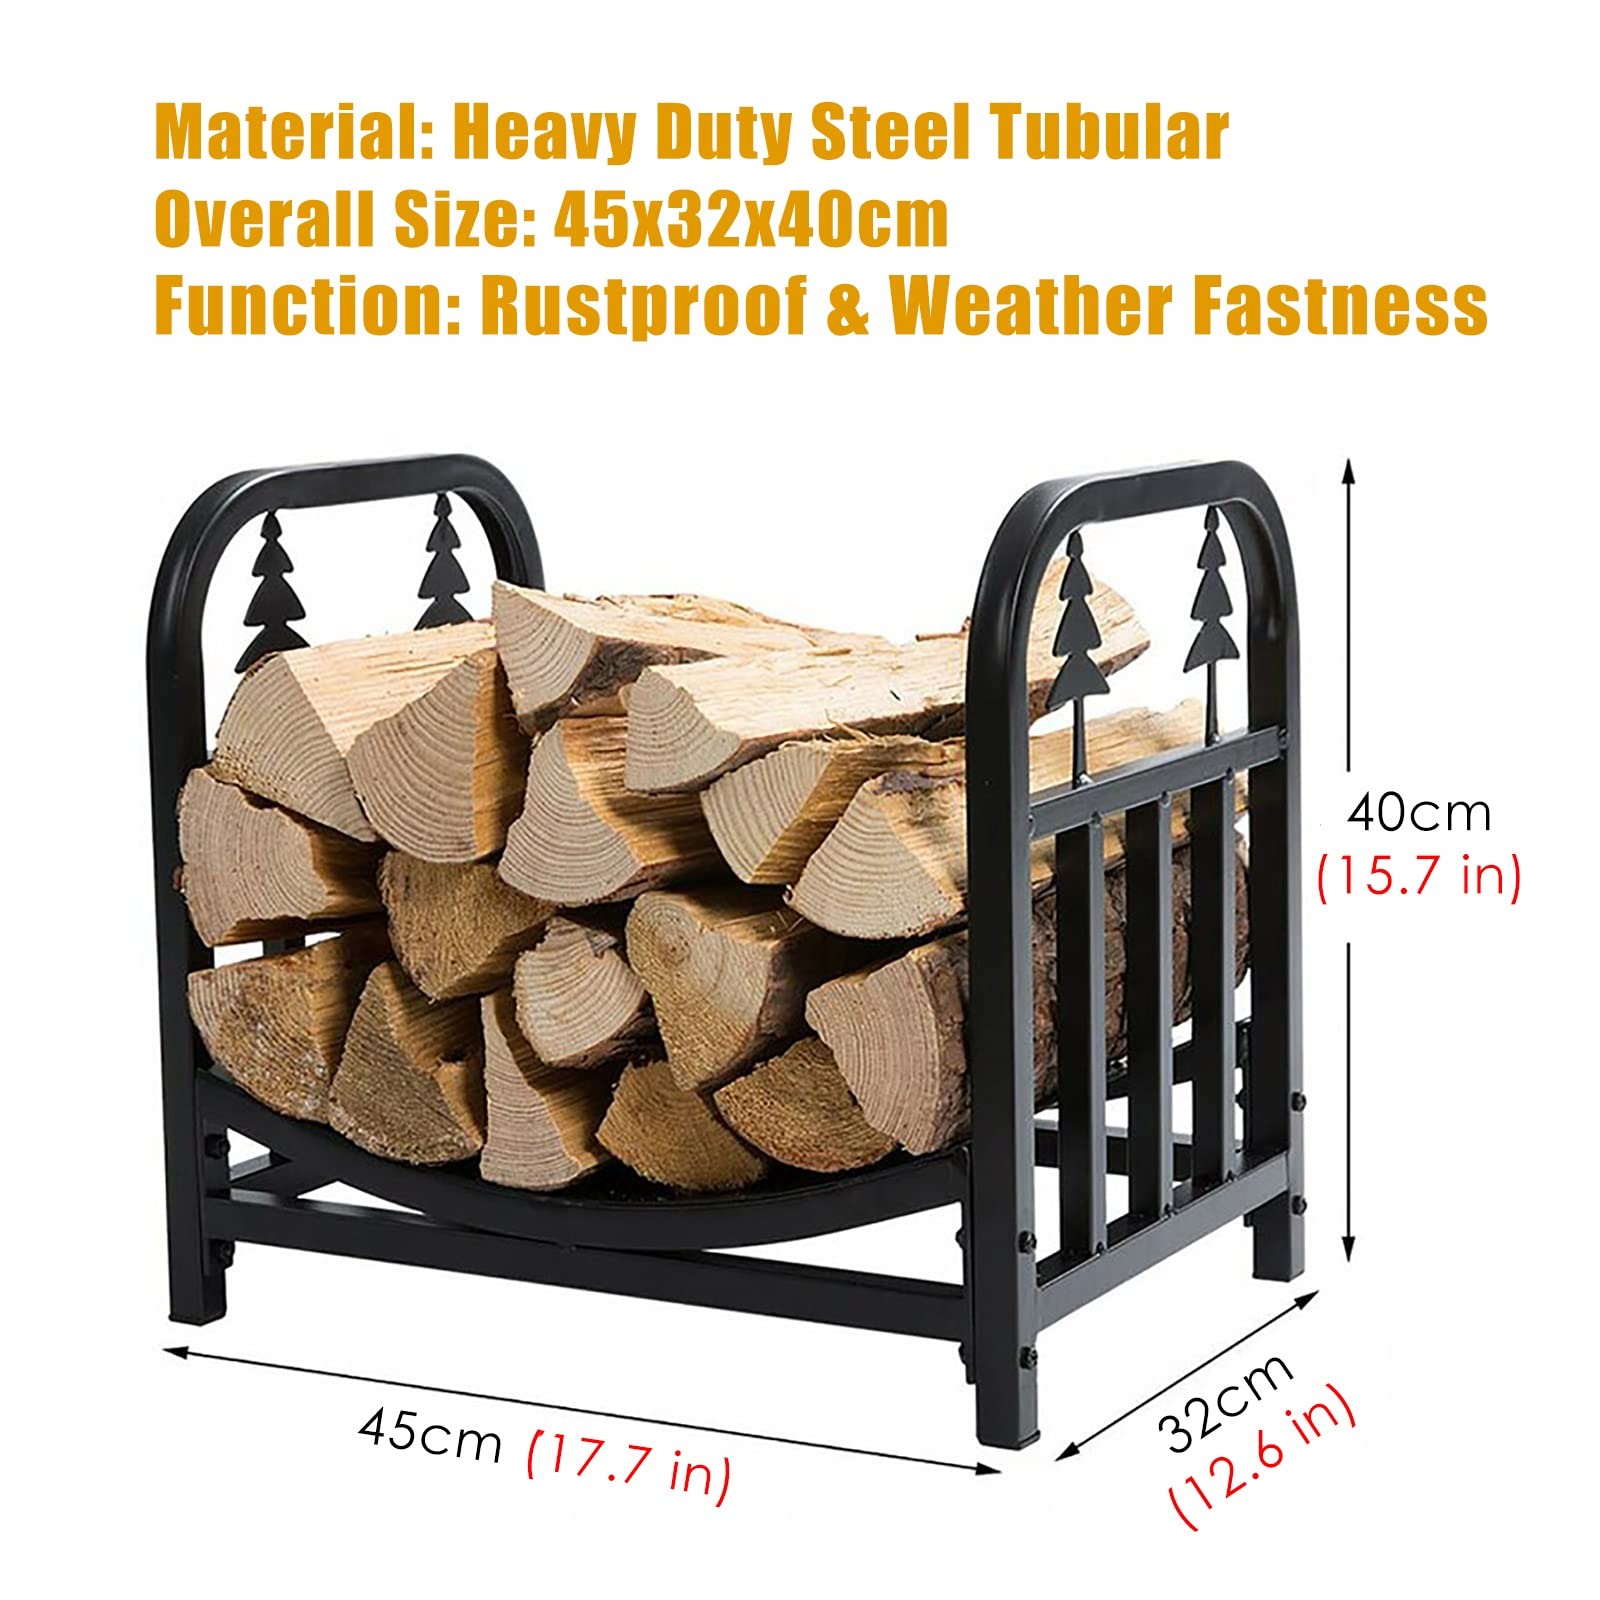 DOZRAN Small 45cm Firewood Log Rack for Indoor Outdoor, Patio Firepit Wood Stacking Holder, Lumber Storage Carrier for All Seasons